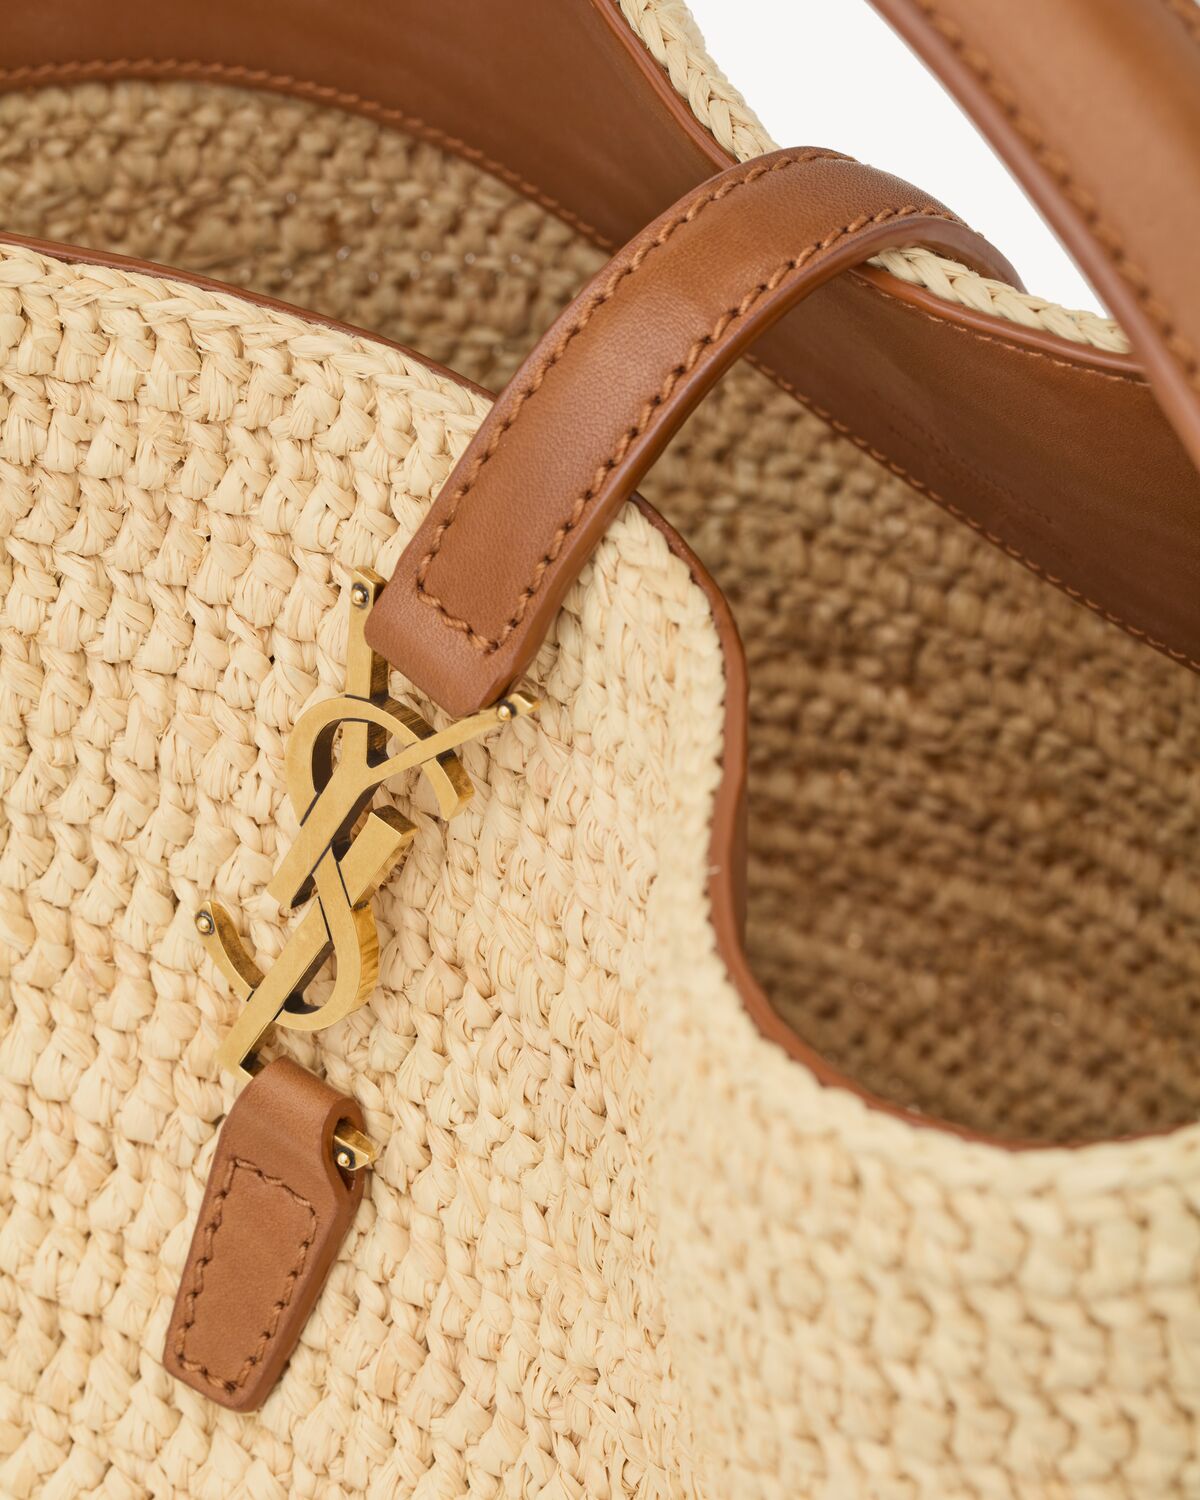 LE 37 in woven raffia and vegetable-tanned leather